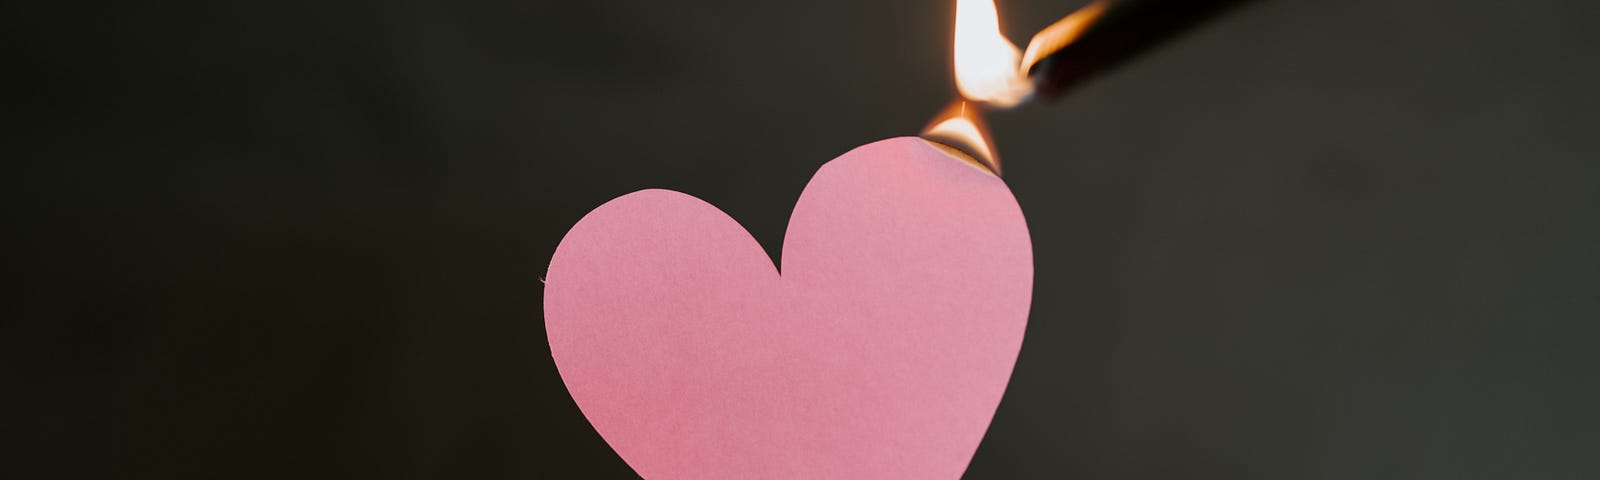 A person holding a pink heart-shaped paper as it slowly lit on fire with a lighter